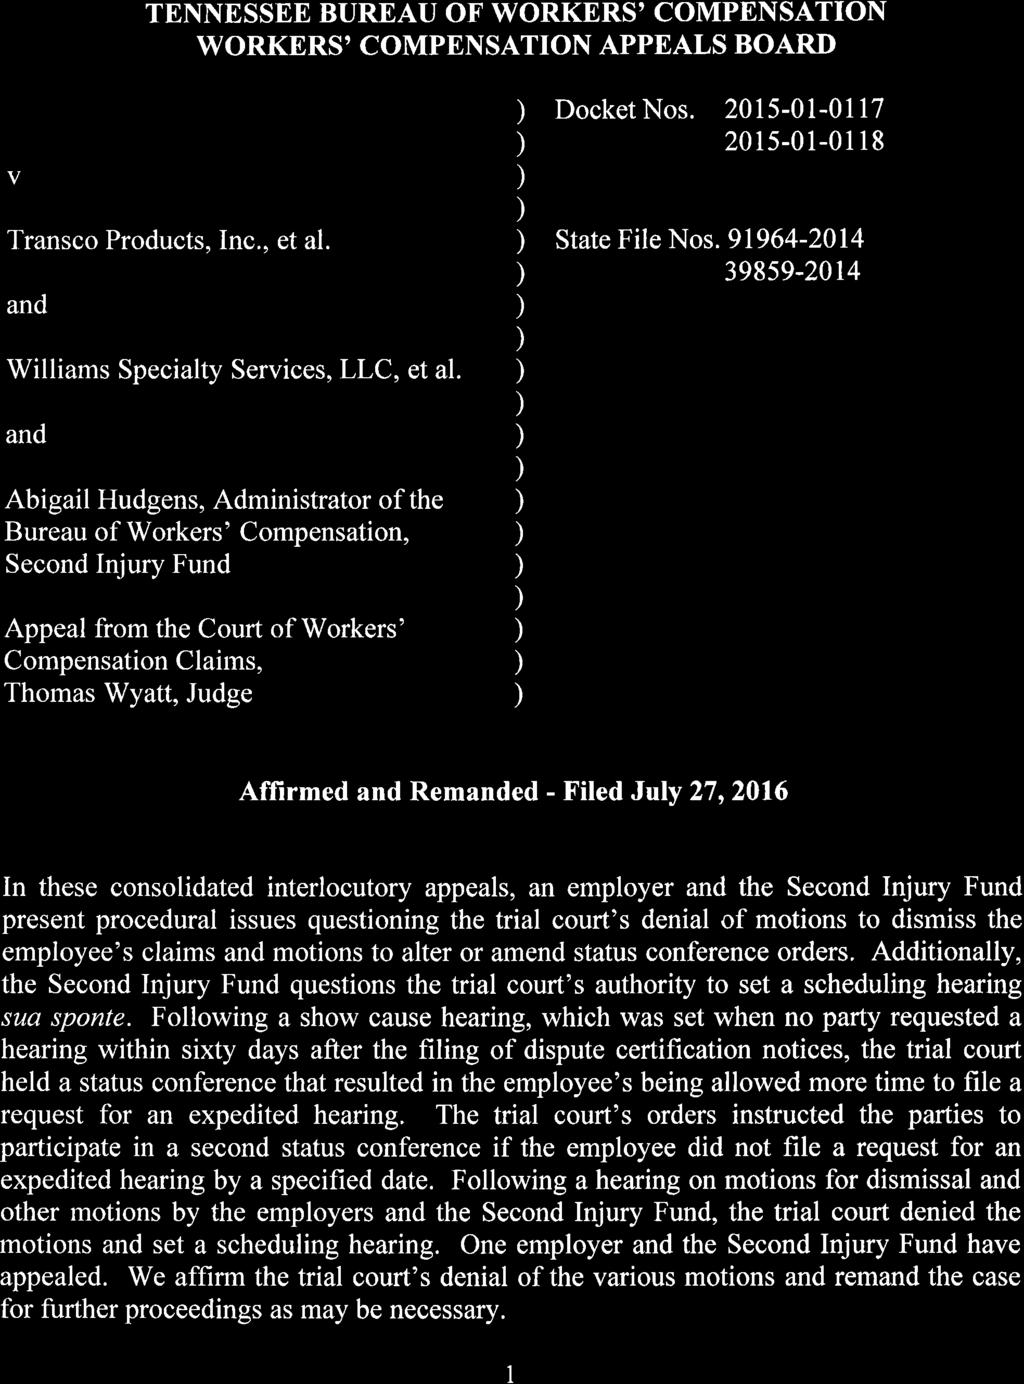 FILED July 27, 2016 TENNESSEE WORKERS' COMPENSATION APPEALS BOARD TENNESSEE BUREAU OF WORKERS' COMPENSATION WORKERS' COMPENSATION APPEALS BOARD Time: 1 :04 P.M. Lazaro Valladares v.